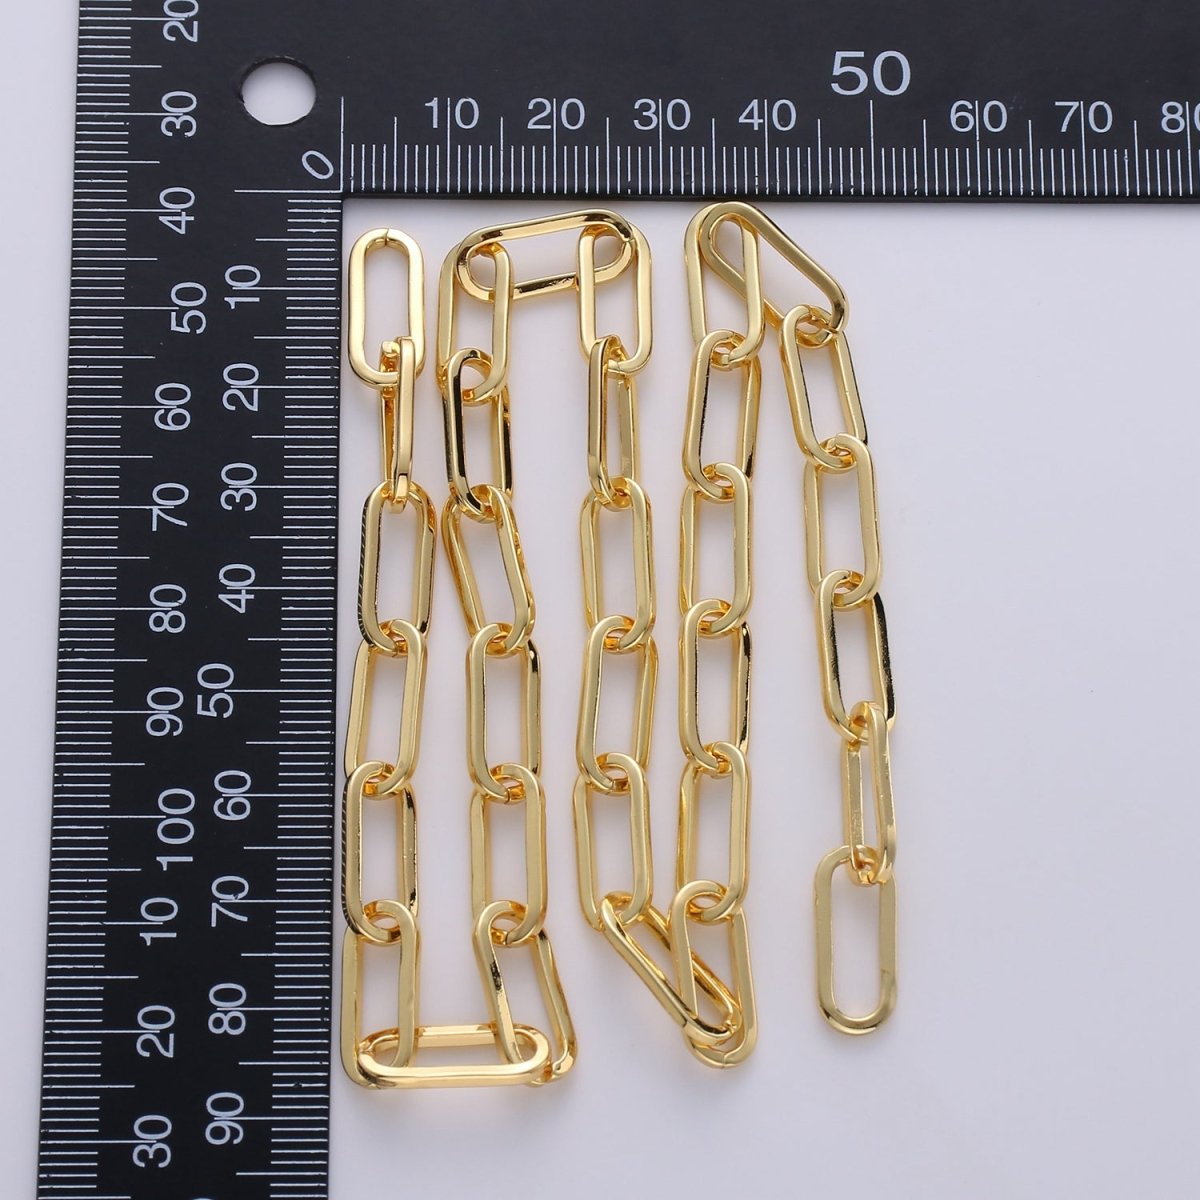 Chunky Paperclip Chain Necklace 16x7mm 24K Gold Filled Jumbo Link Paper Clip Chain 1 yard Lead, Nickel Free Unfinished Link Chain | ROLL-232 - DLUXCA